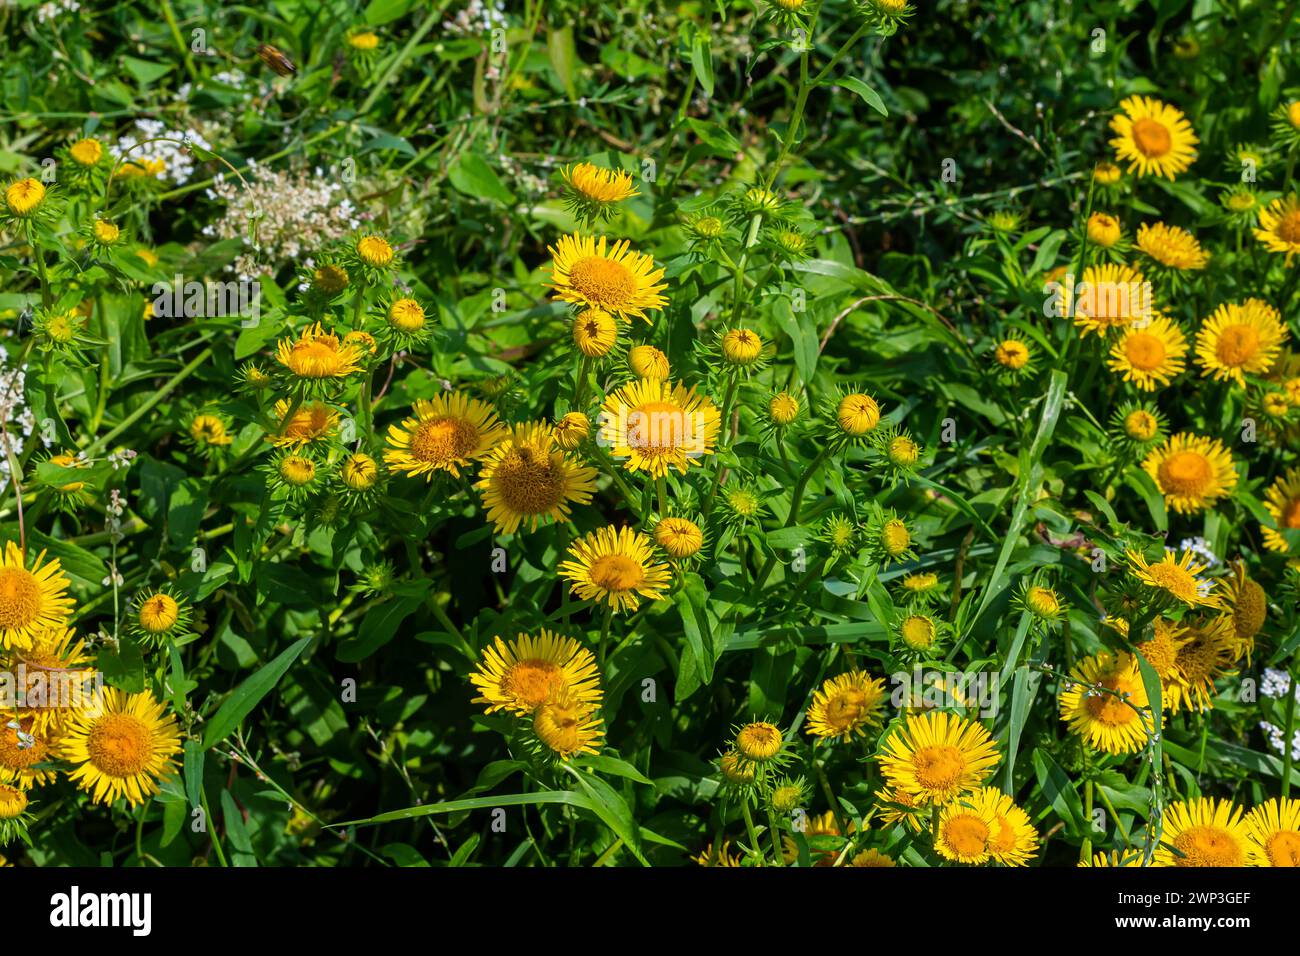 In the summer, the wild medicinal plant Inula blooms in the wild. Stock Photo